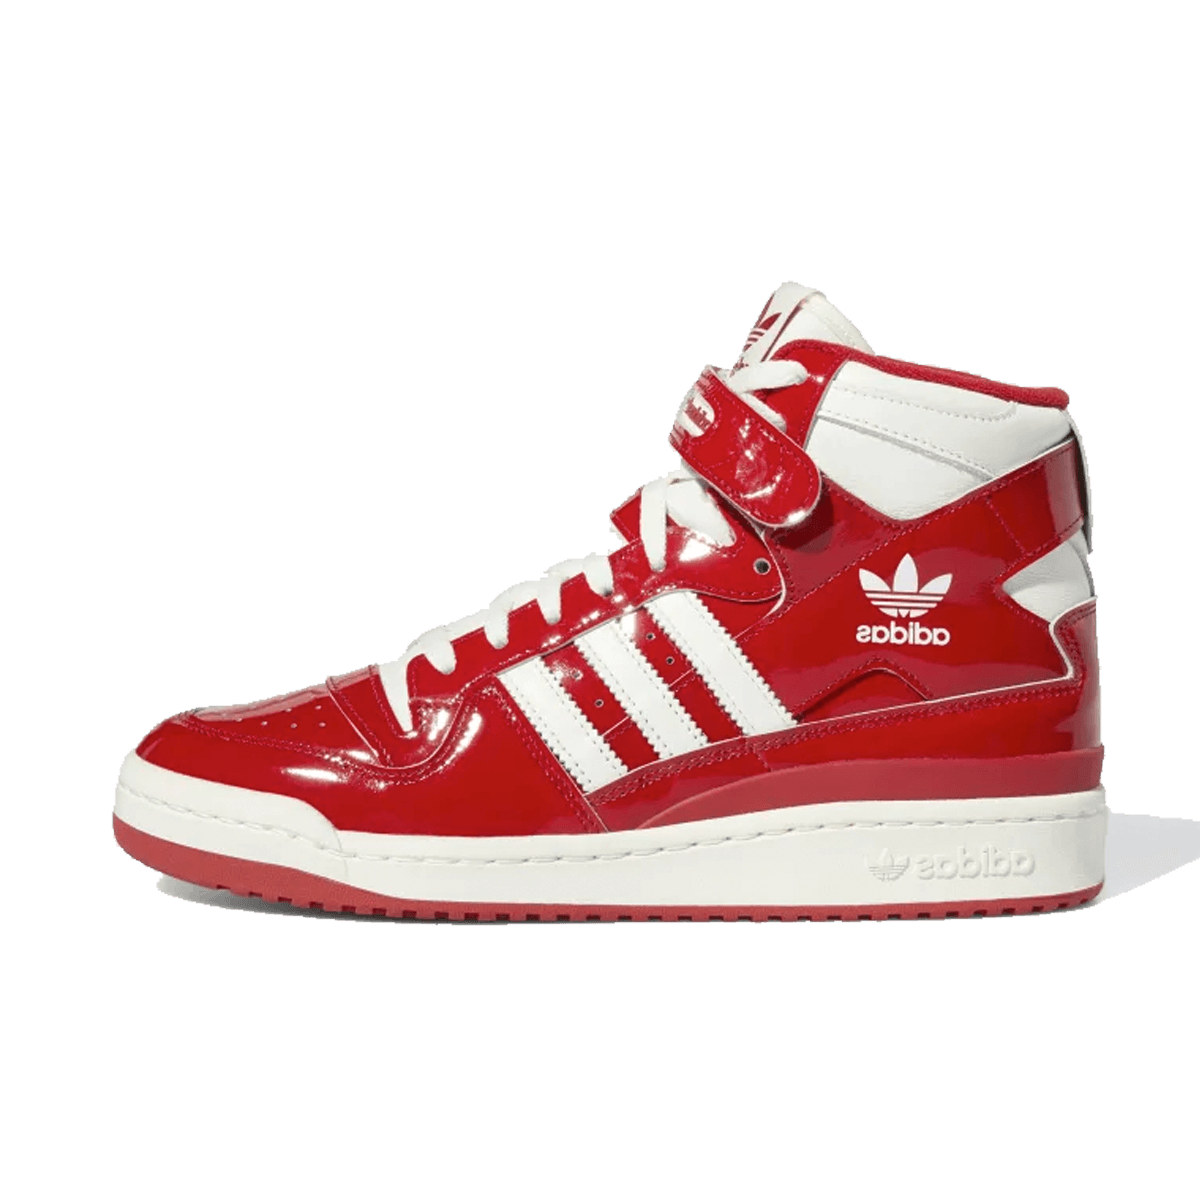 adidas Forum 84 High Patent 'Red White' GY6973